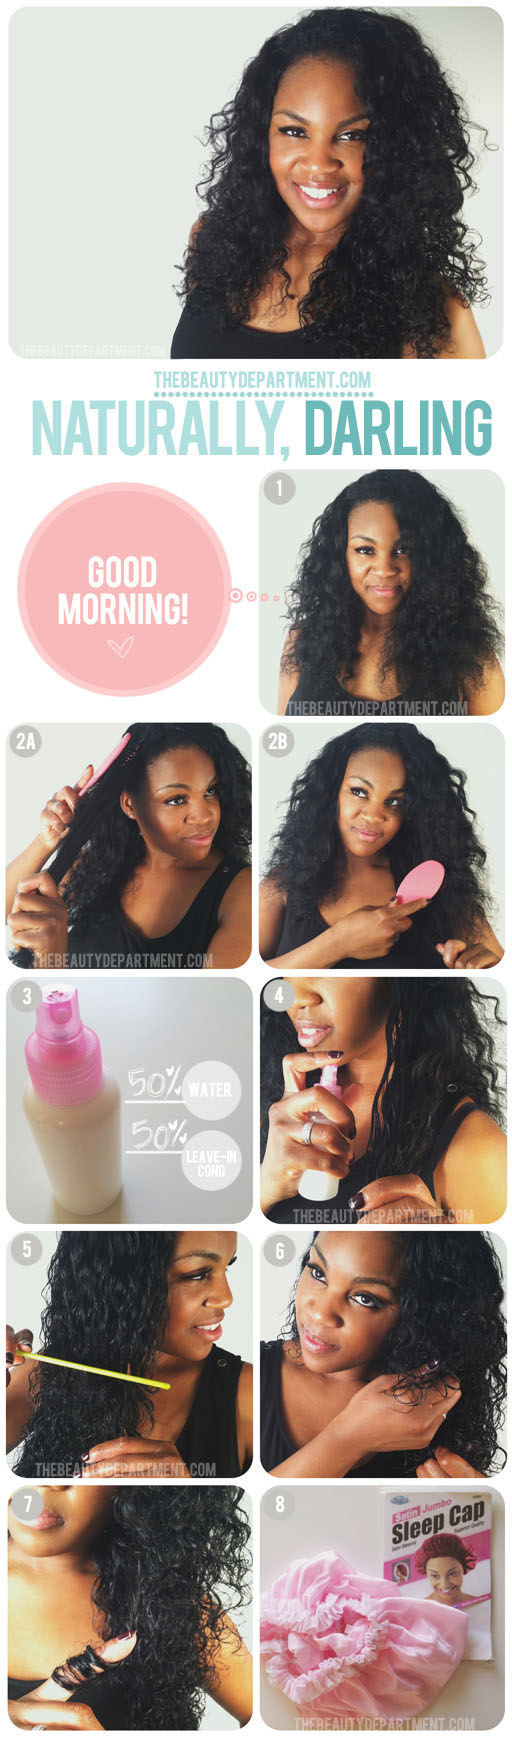 Hair Hack - The fastest way to curl hair extensions - Hair Romance